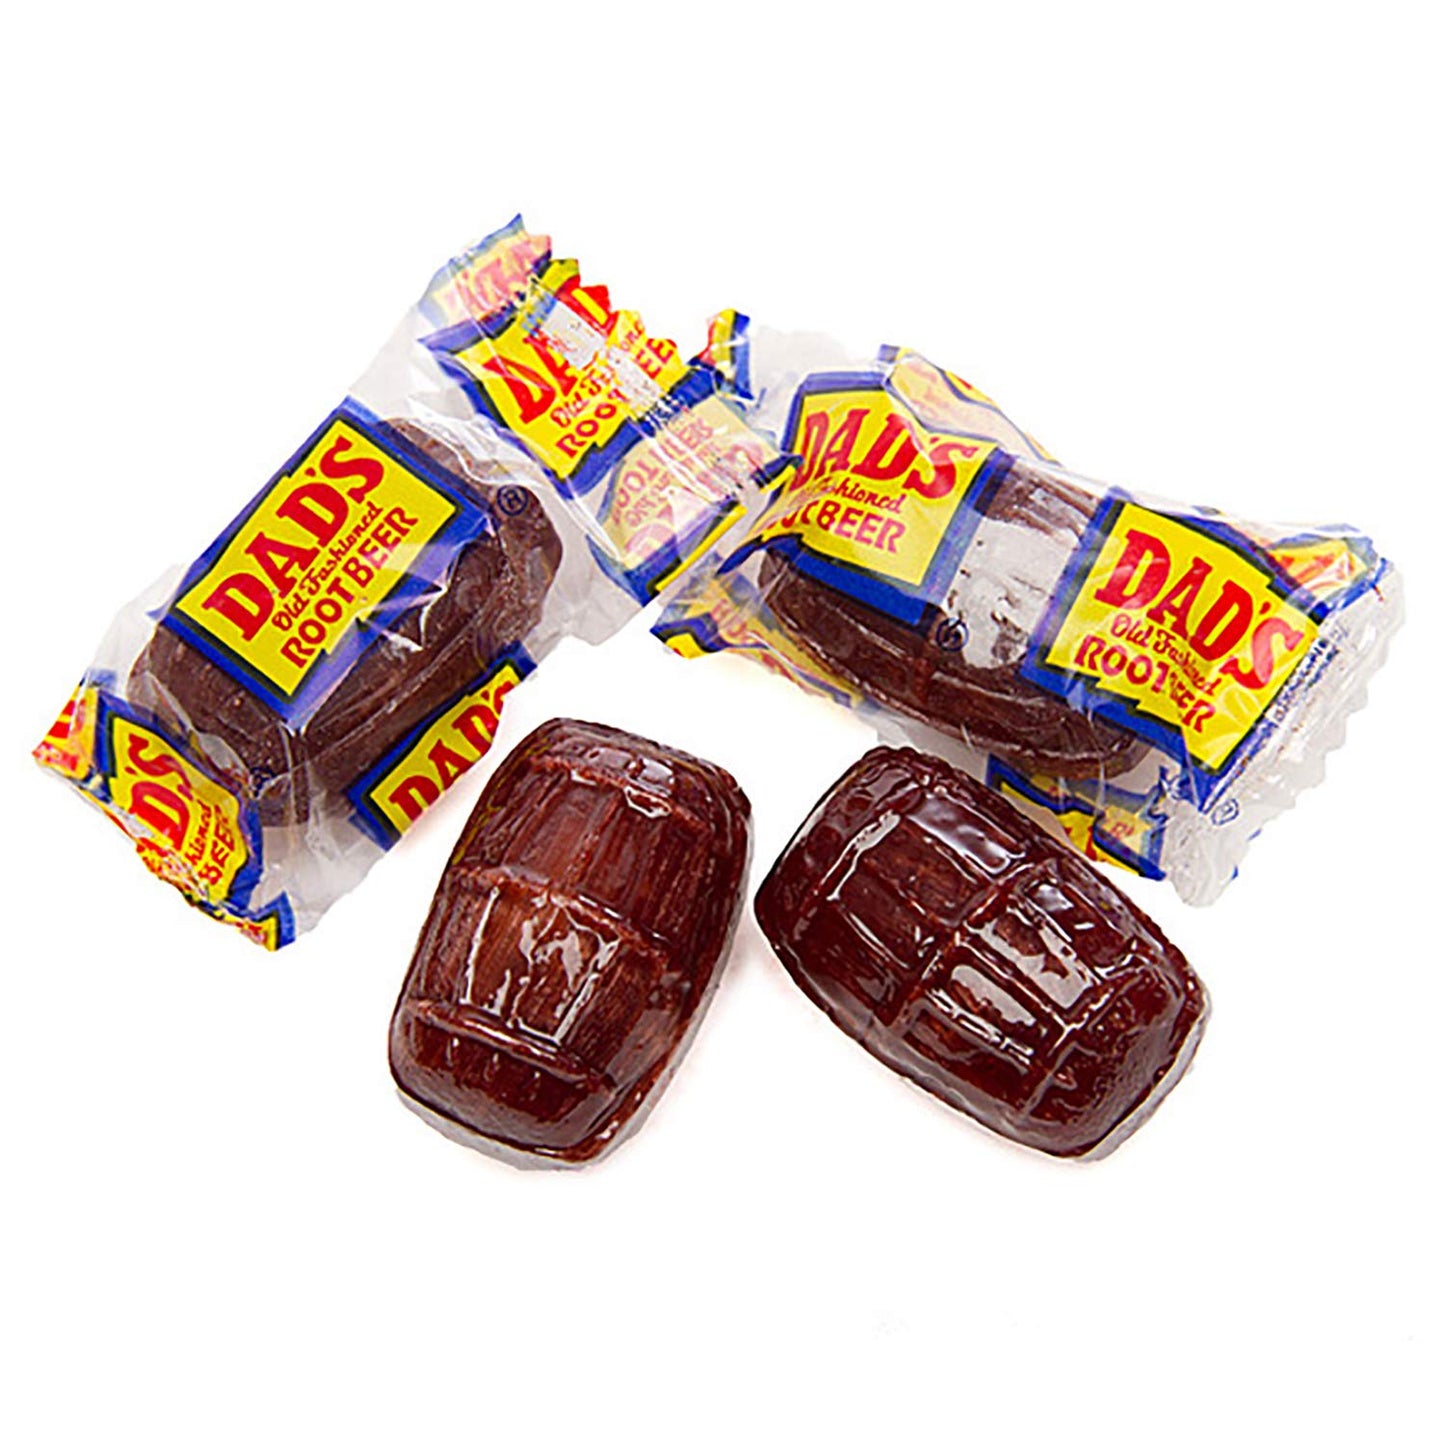 Dad's Root Beer Barrels - Rootbeer Barrels Hard Candy - 4 Pounds - Washburn Old Fashioned Candies - Individually Wrapped Bulk Barrells